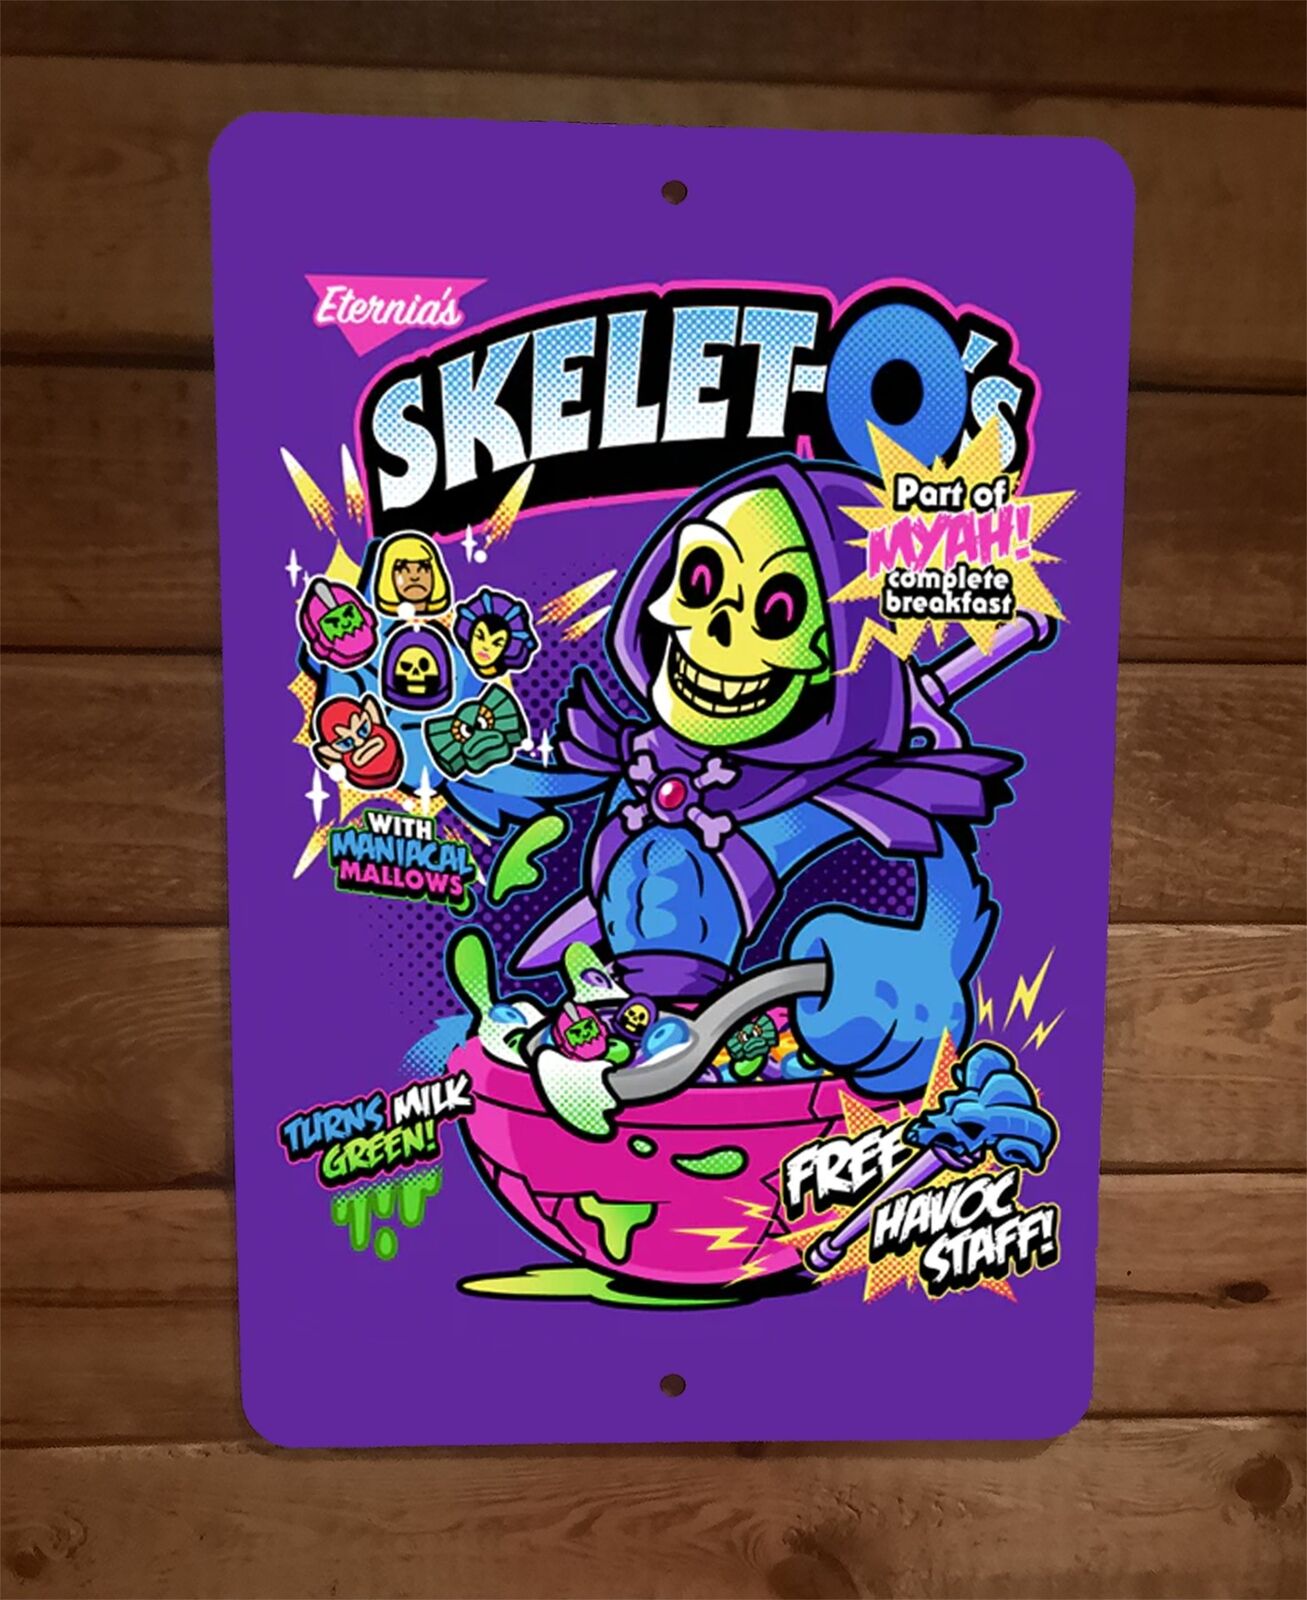 Skelet-Os MOTU Cereal Skeletor Masters of the Universe 8x12 Metal Wall Sign